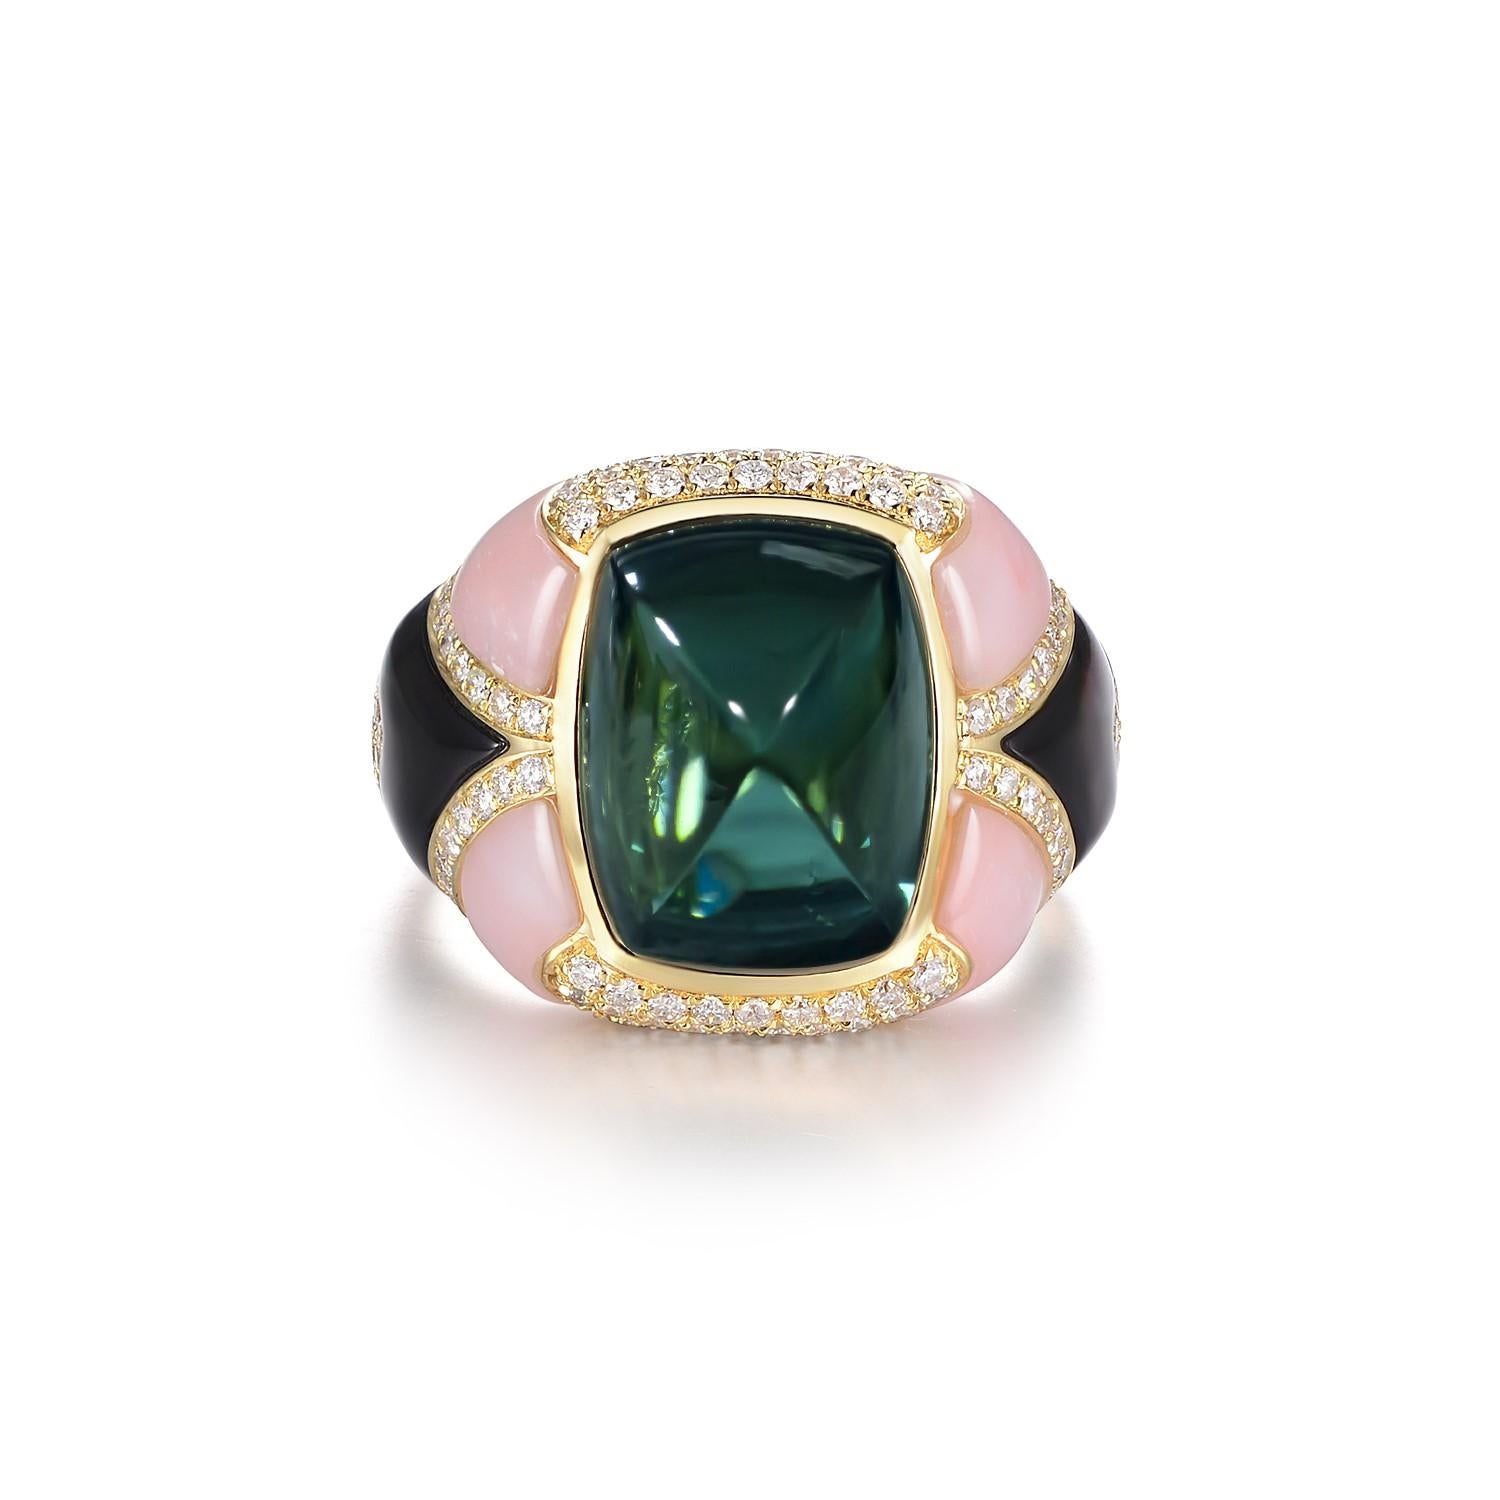 Introducing an absolutely stunning ring that exudes elegance and sophistication. Made from premium 18 karat yellow gold, this piece features a beautiful 8.95 carat sugarloaf cabochon green tourmaline, measuring 13 mm x 10 mm. The tourmaline is